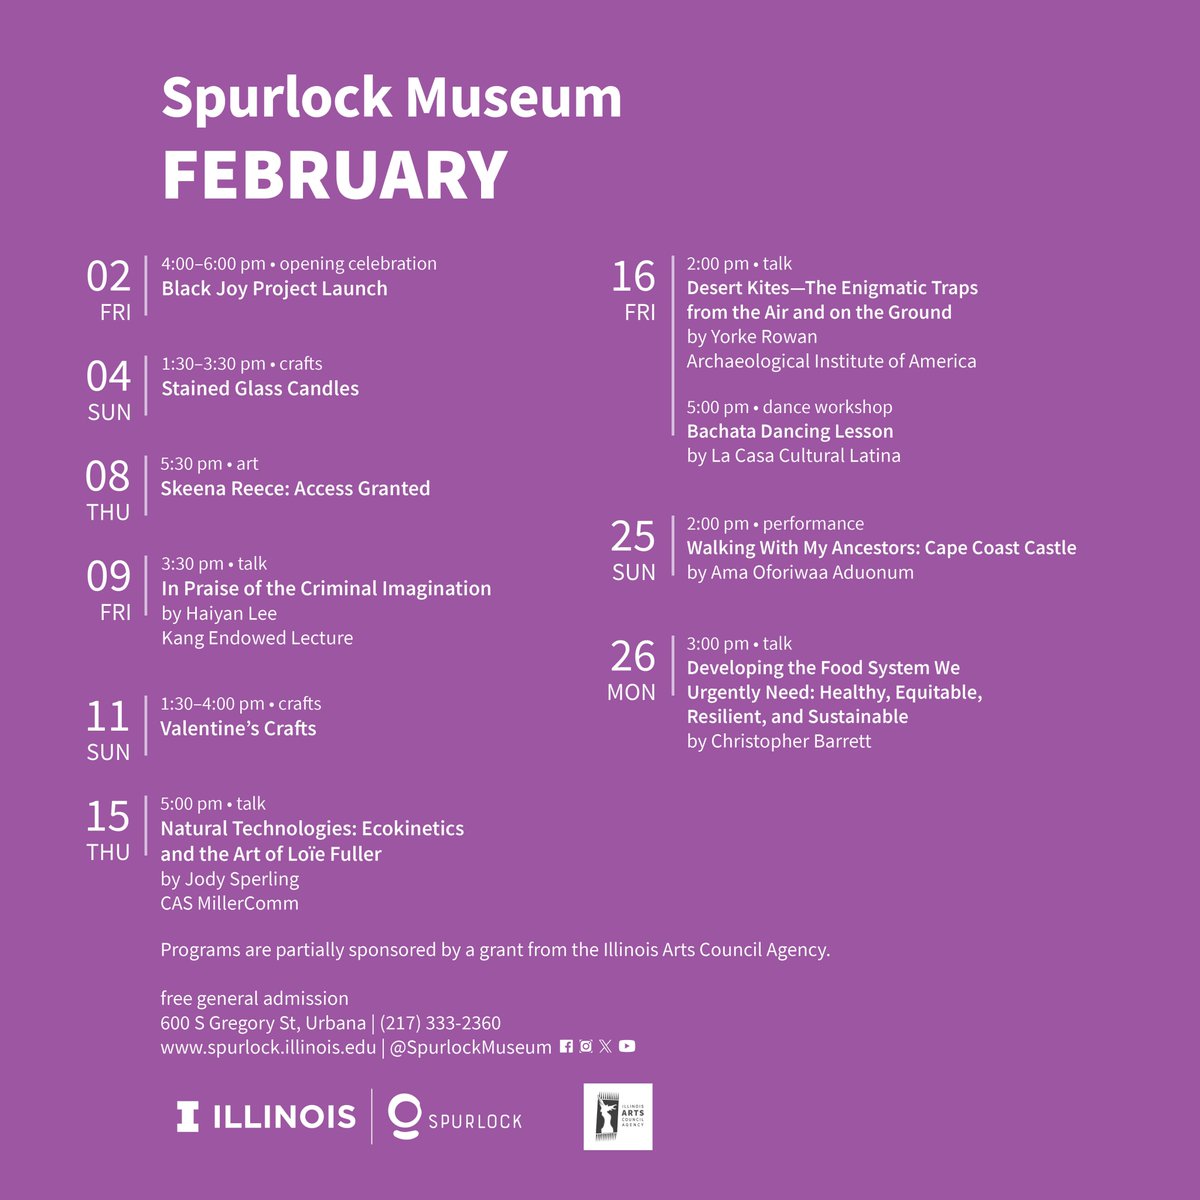 Save the date for an unforgettable February at Spurlock! There are so many fun and engaging events that we have planned for you this month. Make sure to stop by the museum.